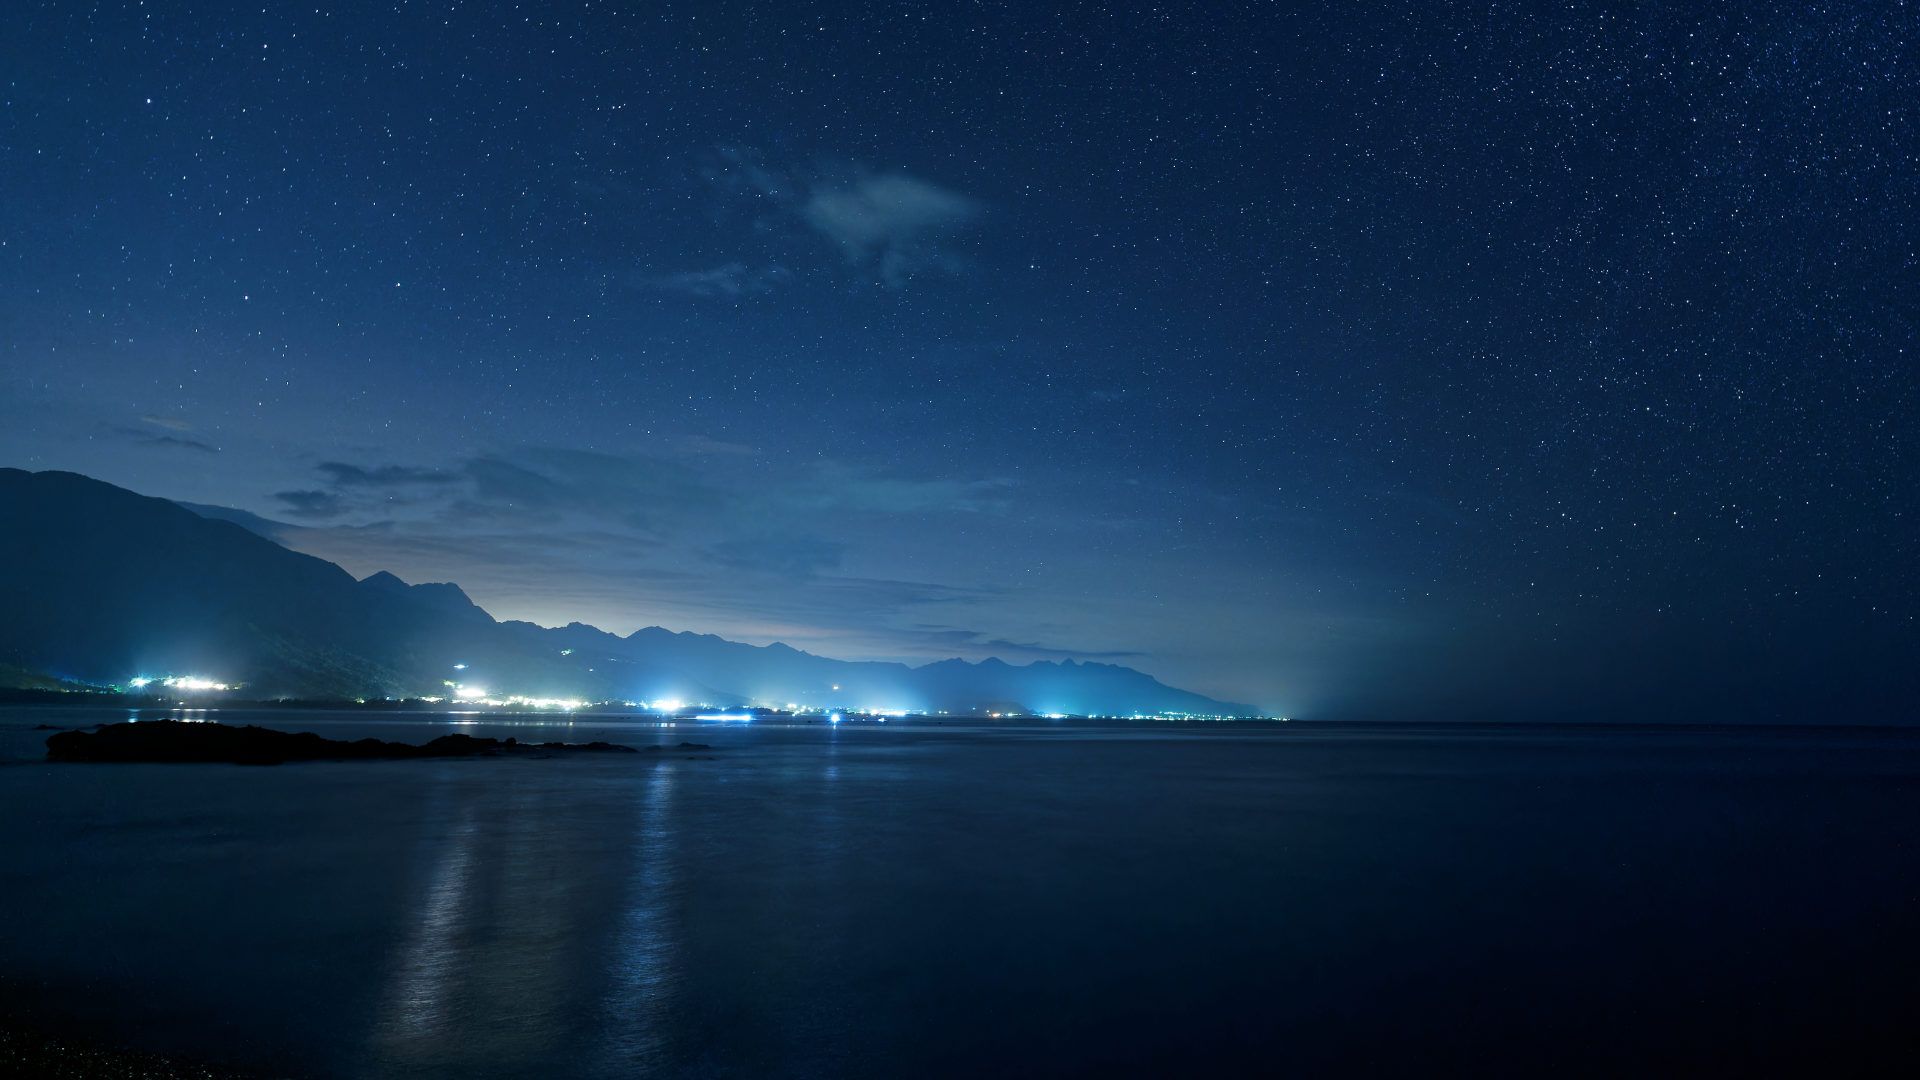 A long-exposure photo of the sea at night, with the lights of coastal towns in the distance. There are stars in the sky. The sea is calm.